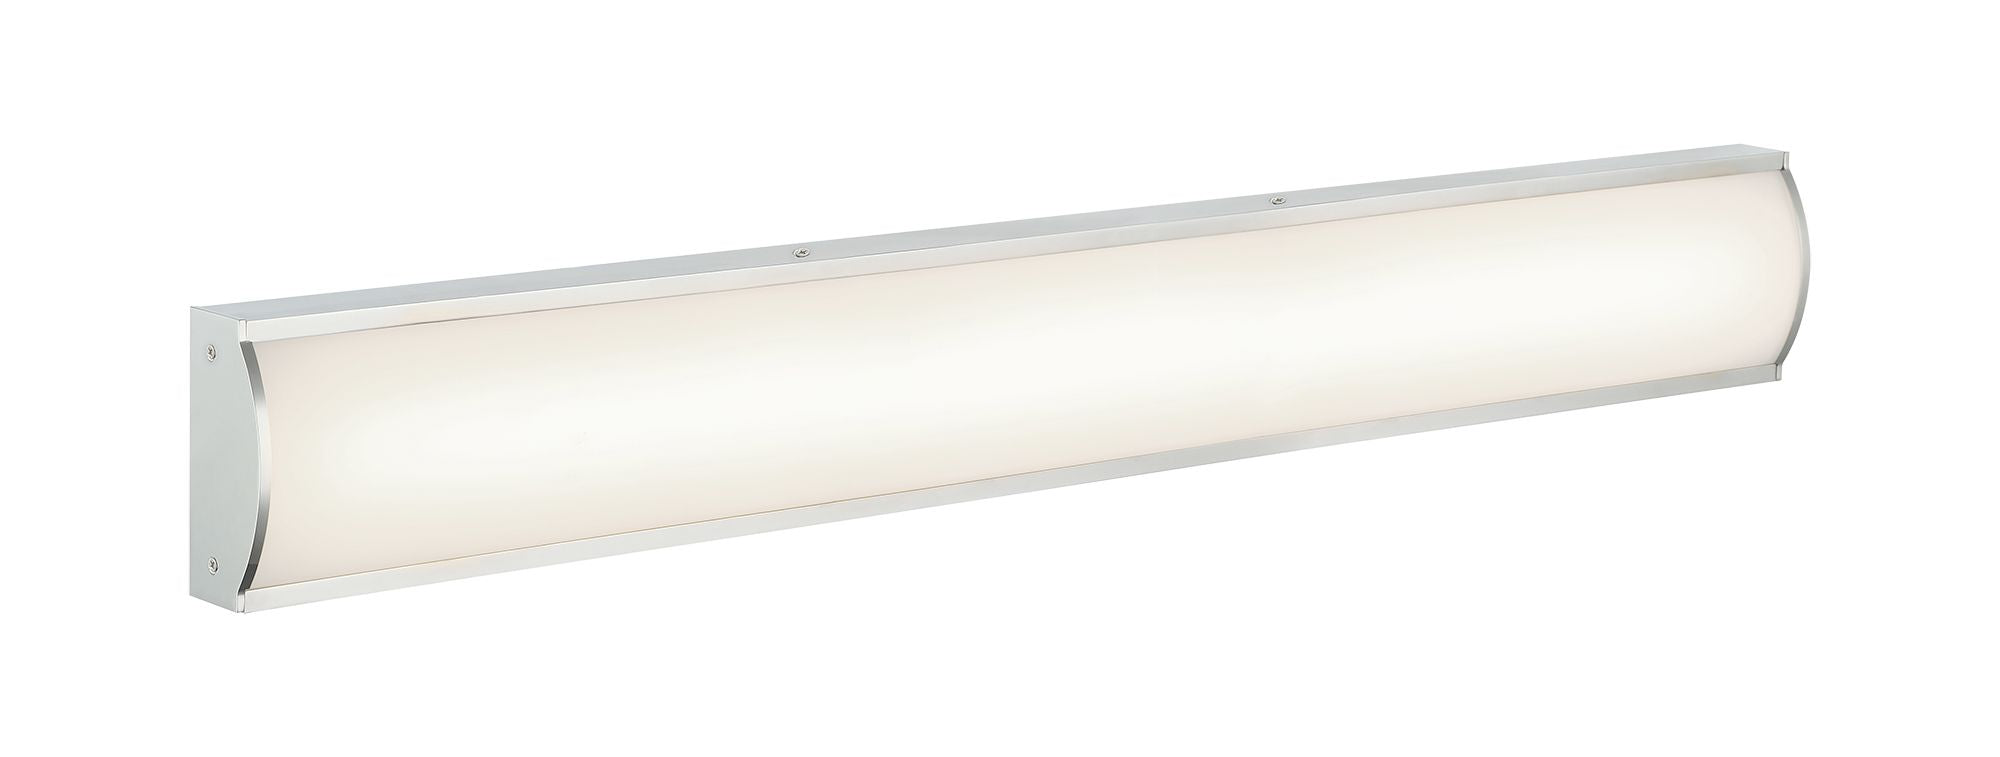 SEMMIE Wall sconce Chrome INTEGRATED LED - S00934CH | MATTEO